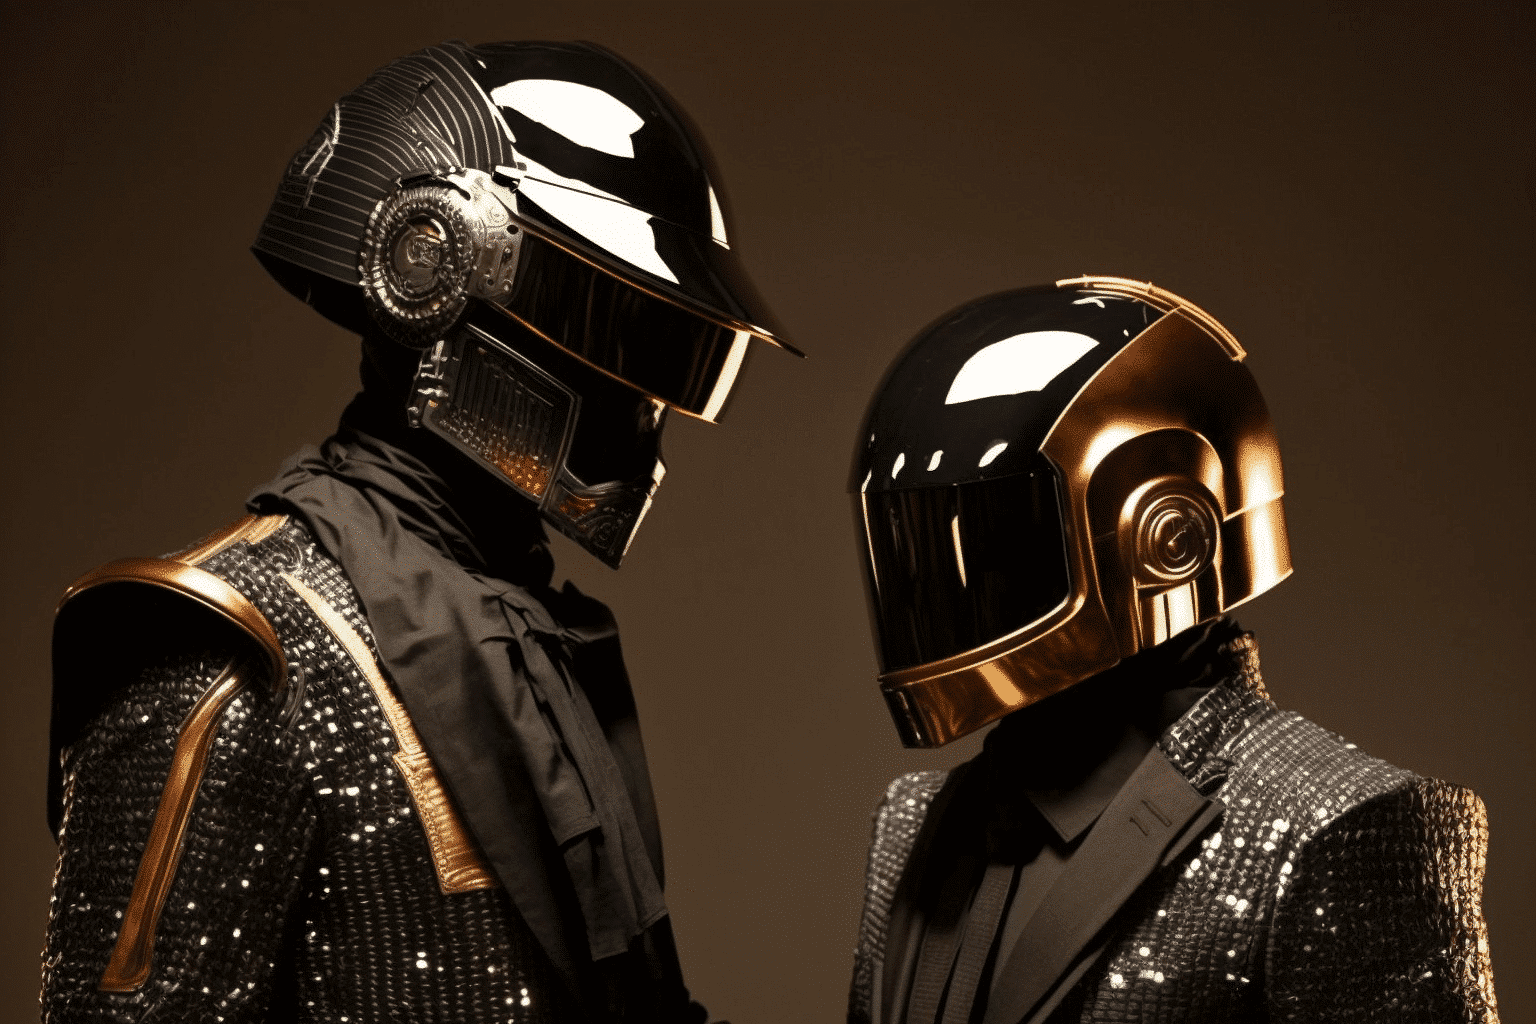 daft-punk-celebrates-10th-anniversary-of-random-access-memories-with-unveiling-of-expanded-edition